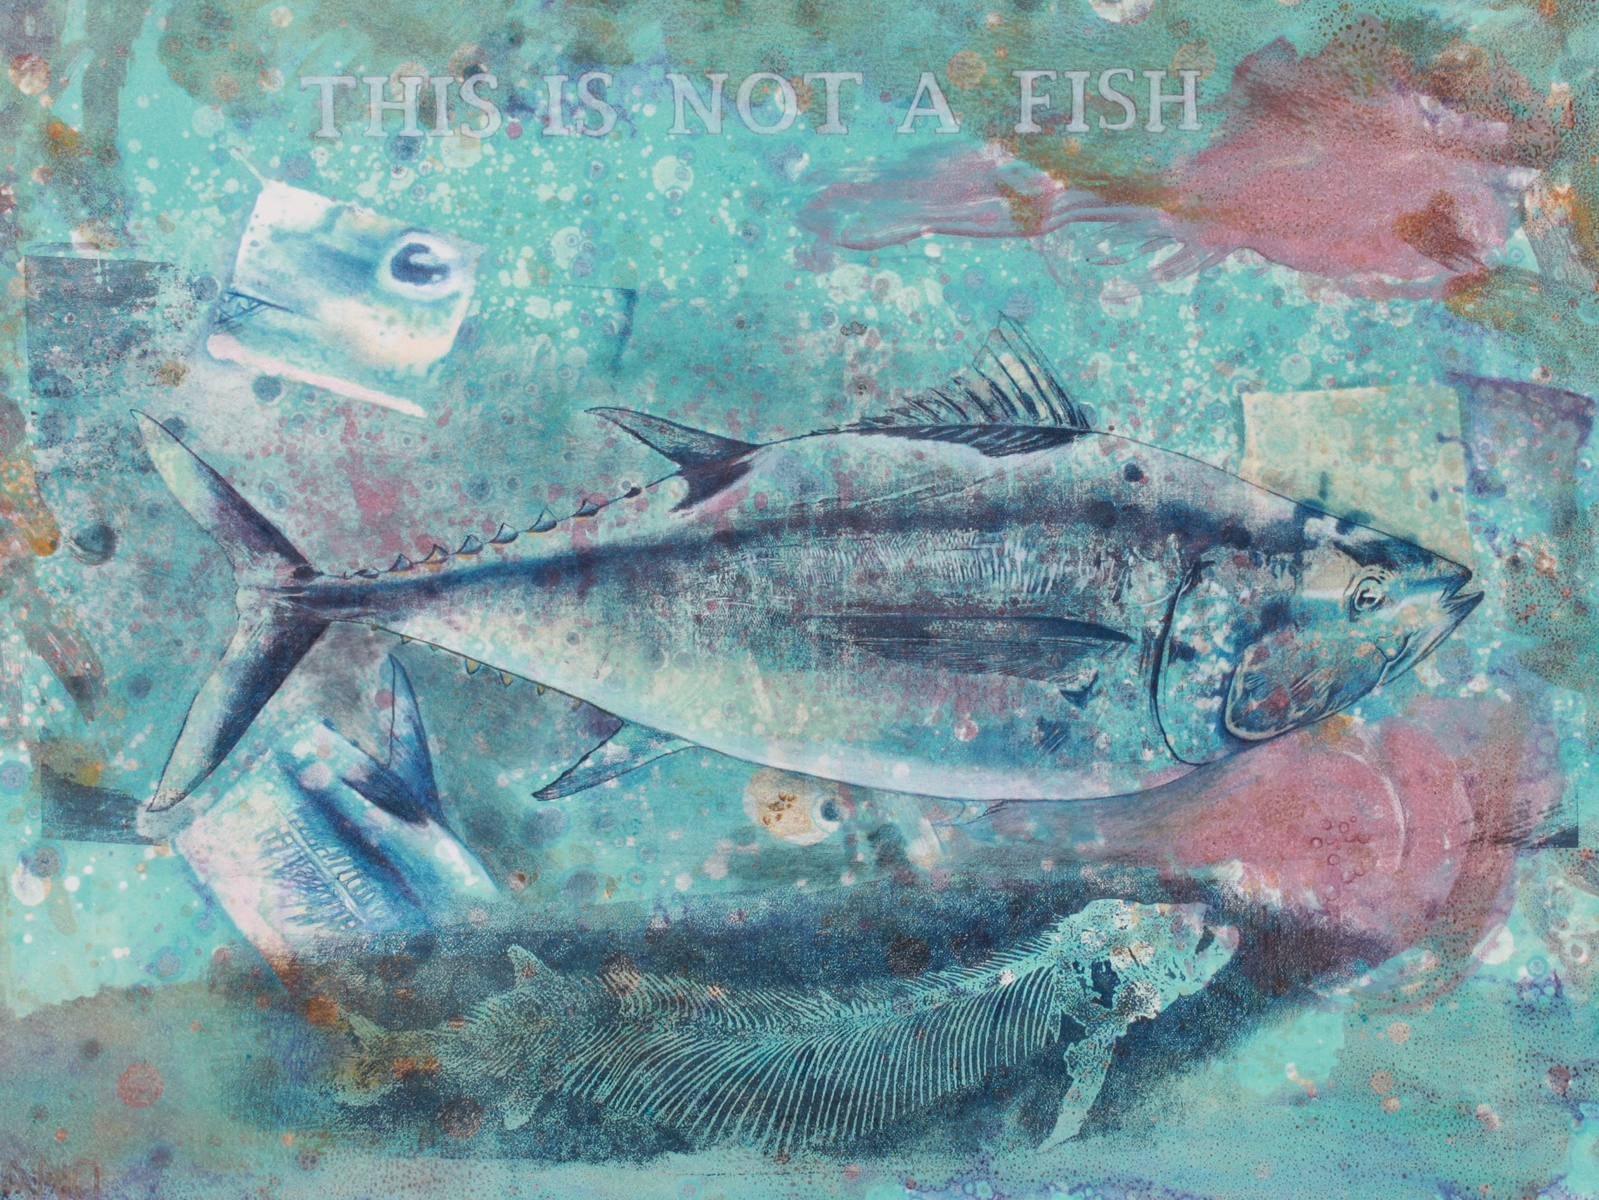 A finely drawn bluefin tuna is at the center of a monoprint filled with dense textures, text, and imagery